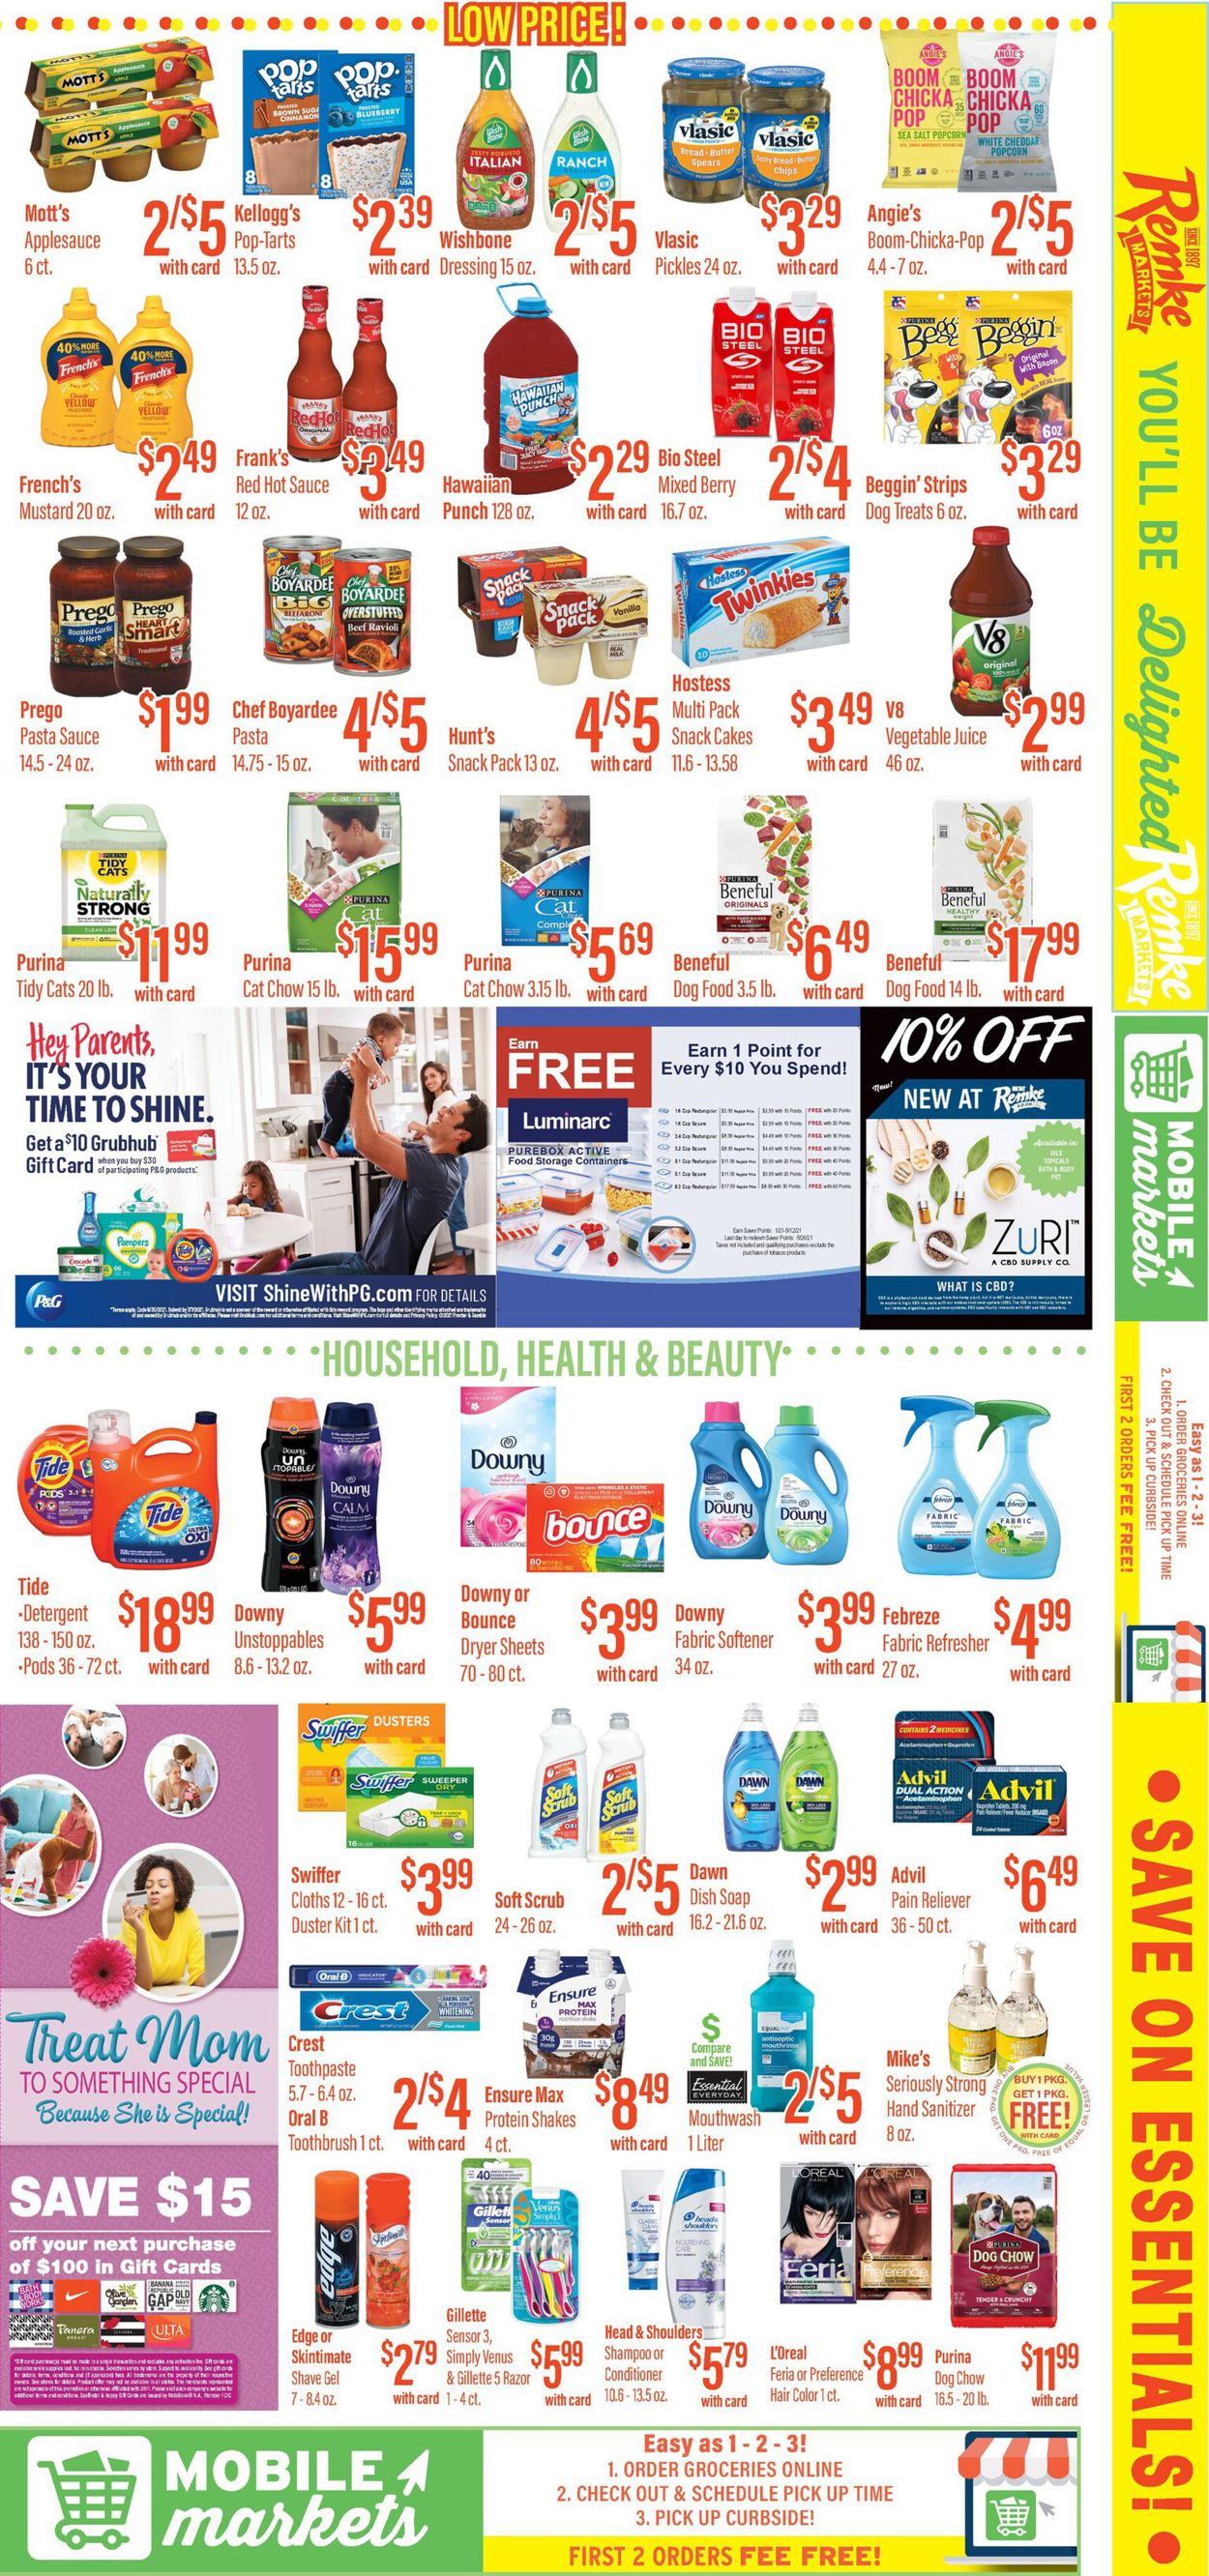 Remke Markets Ad from 04/29/2021